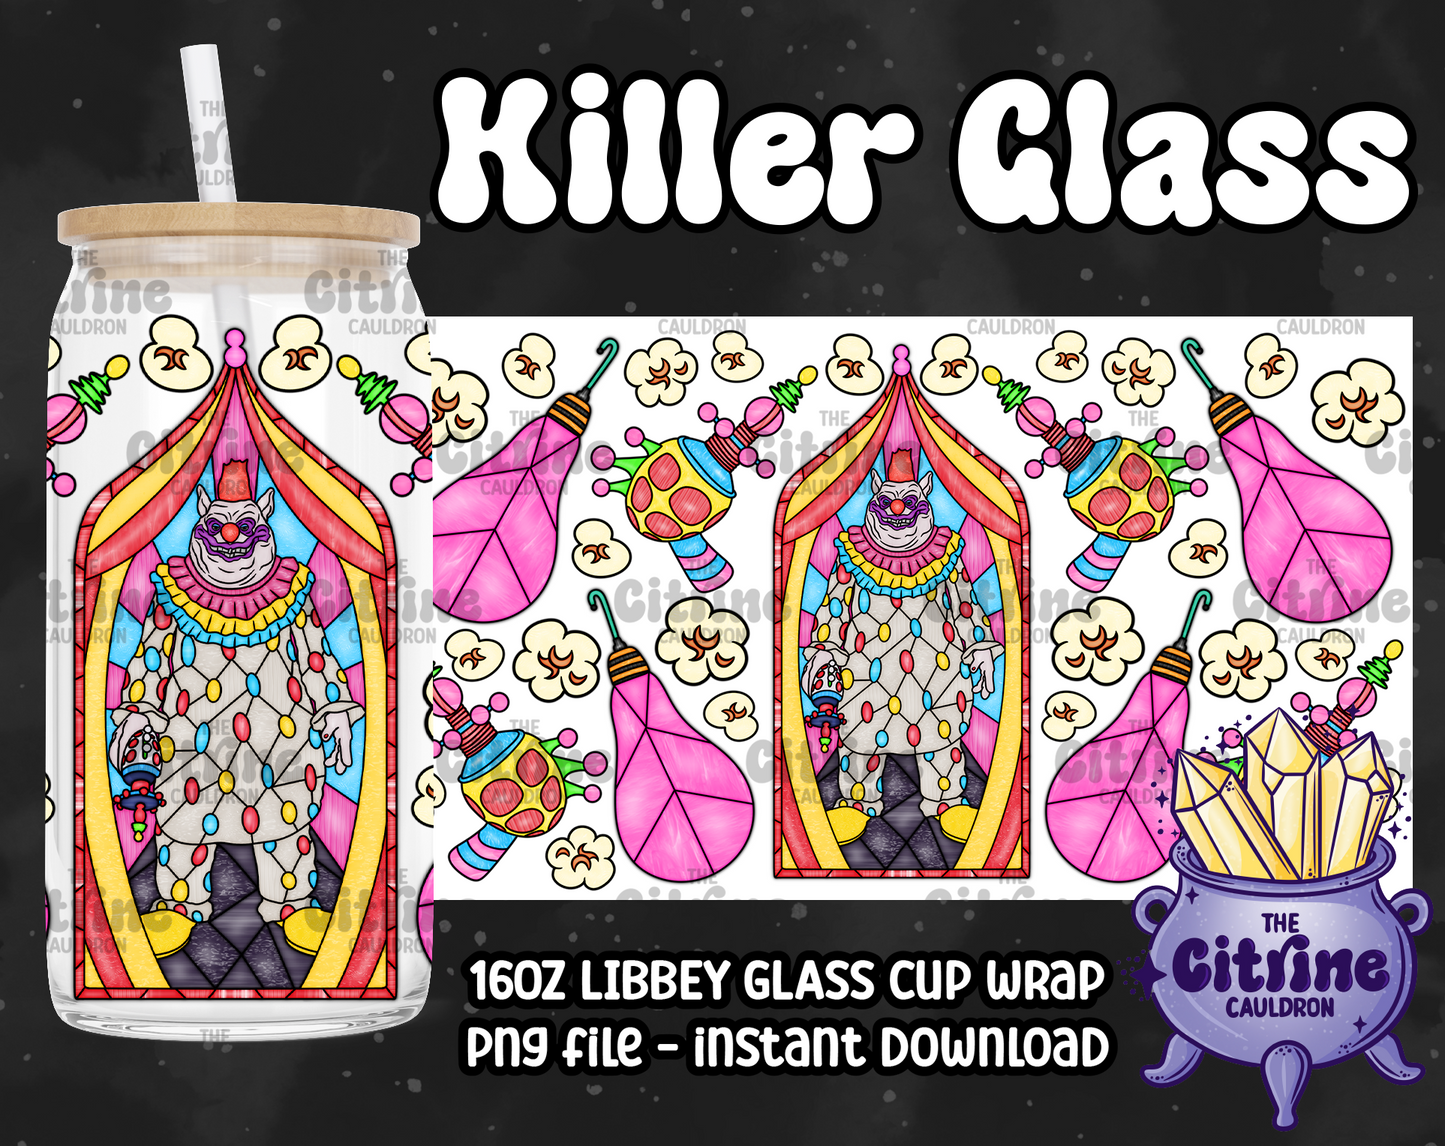 Killer Glass - PNG Wrap for Libbey 16oz Glass Can